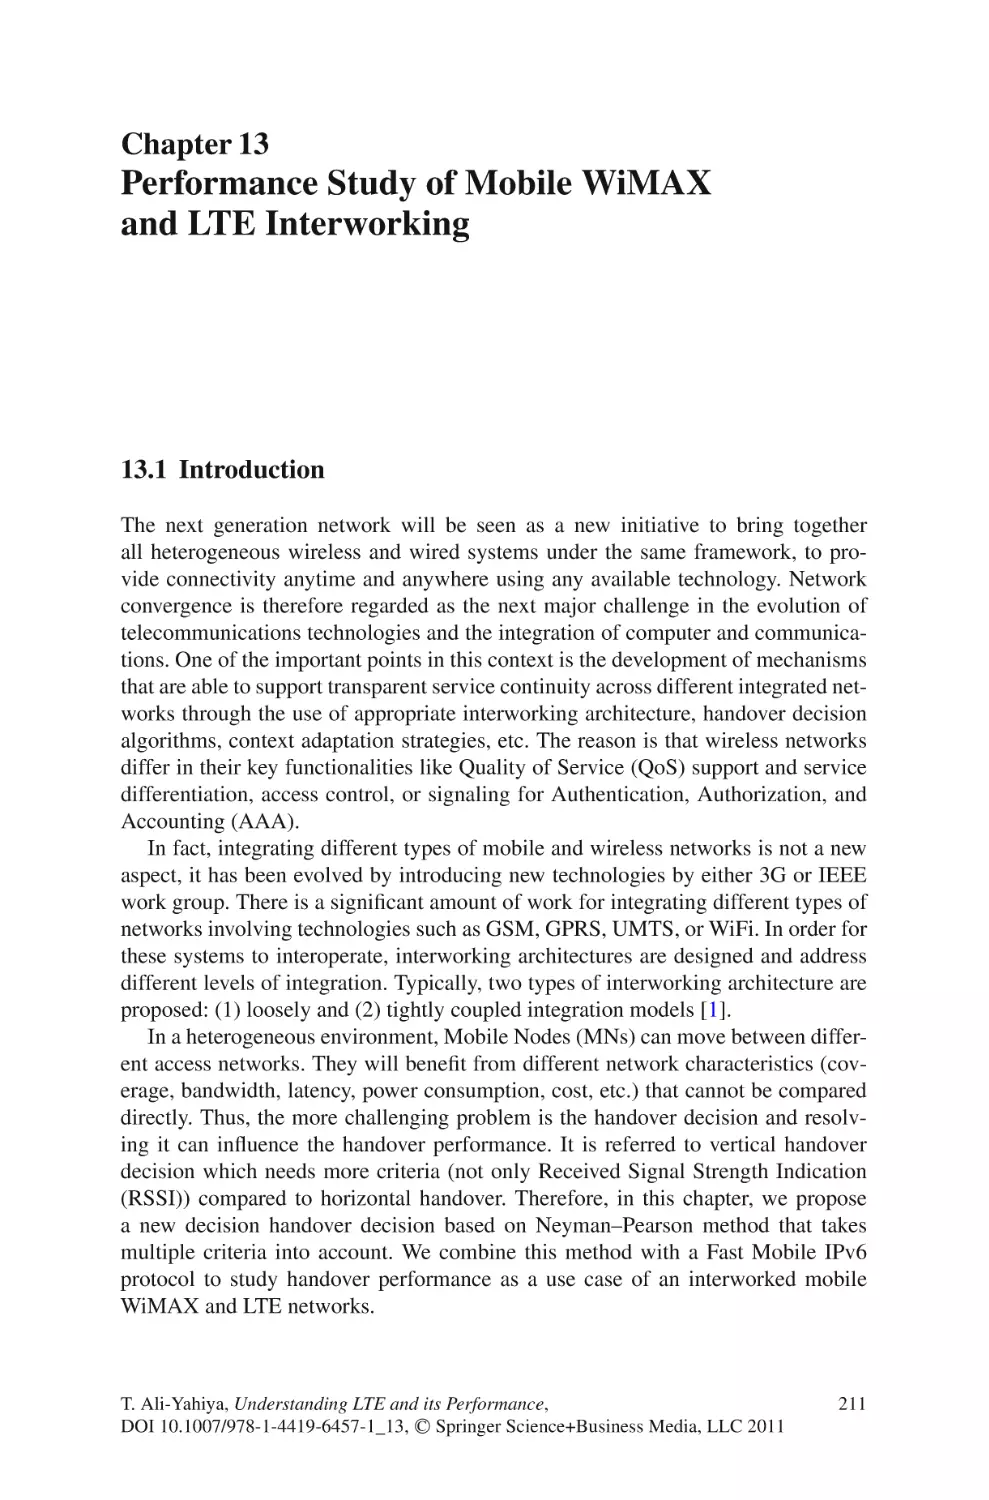 13  Performance Study of Mobile WiMAX and LTE Interworking
13.1  Introduction